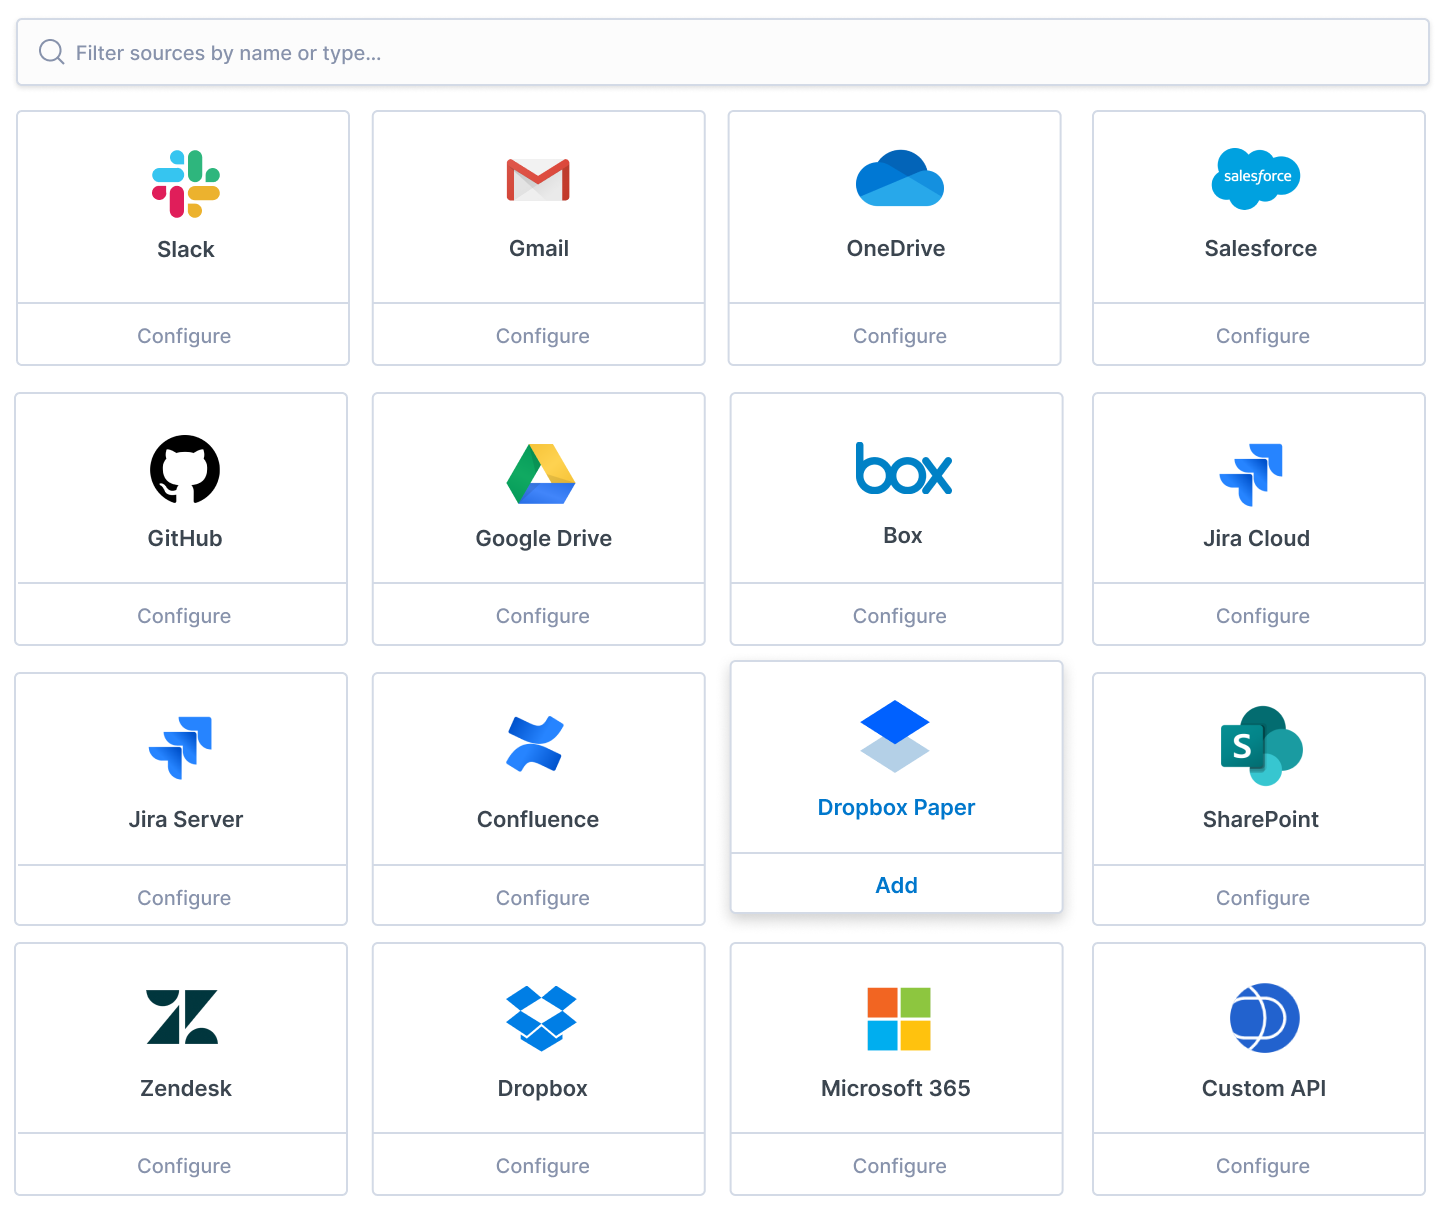 A sampling of the prebuilt connectors in Elastic Workplace, now including Dropbox Paper